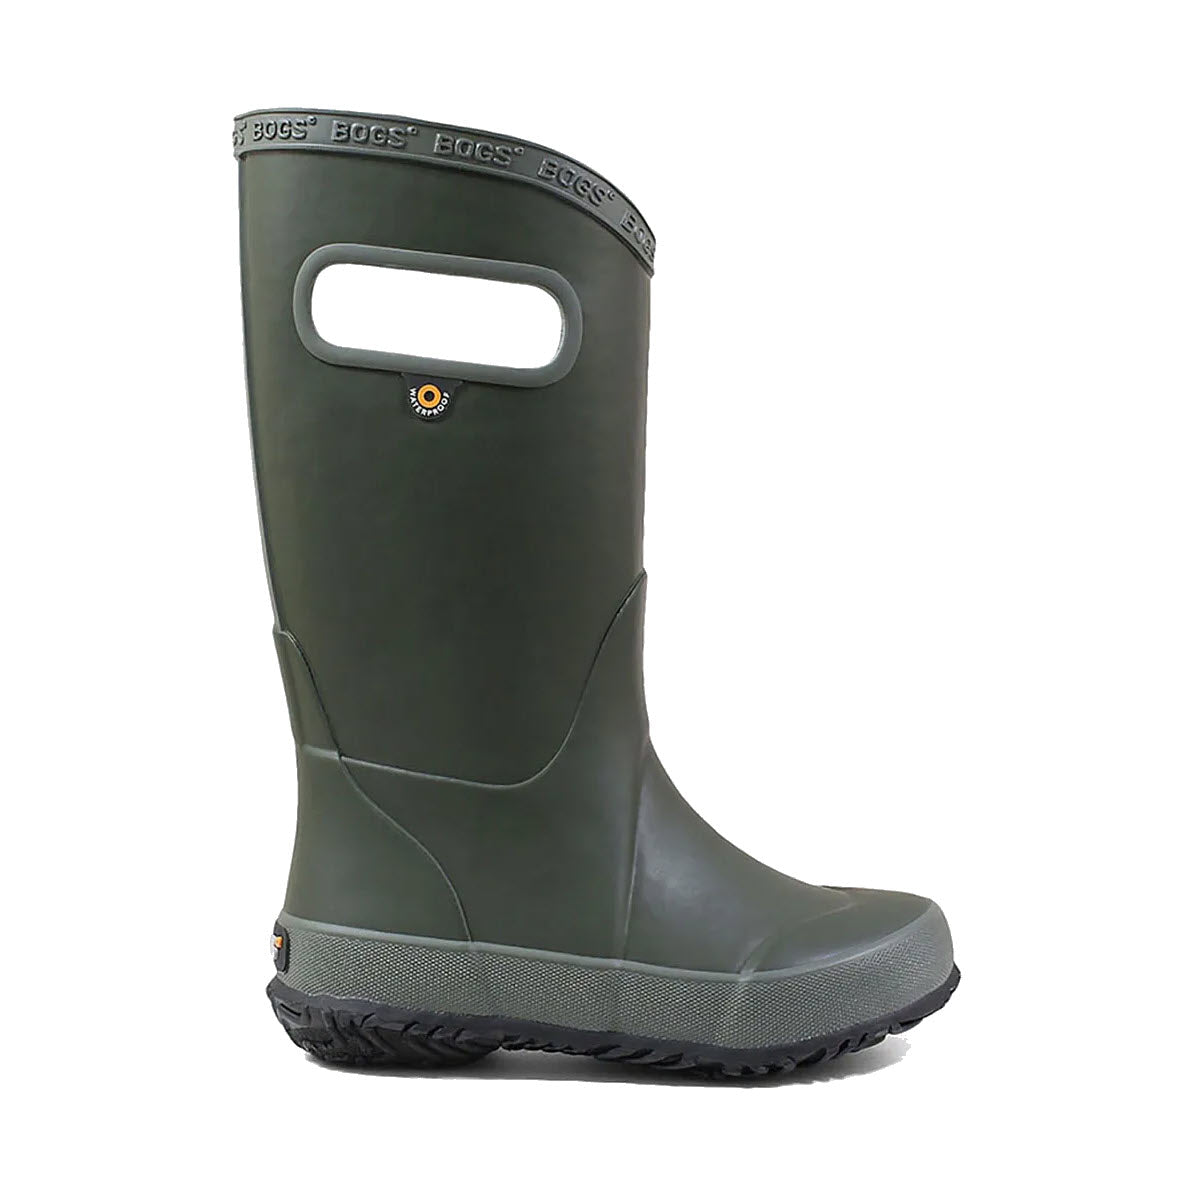 Sentence with replaced product:
Bogs Rainboot Dark Green - Kids with handle cutouts and logo detail at the top, waterproof.